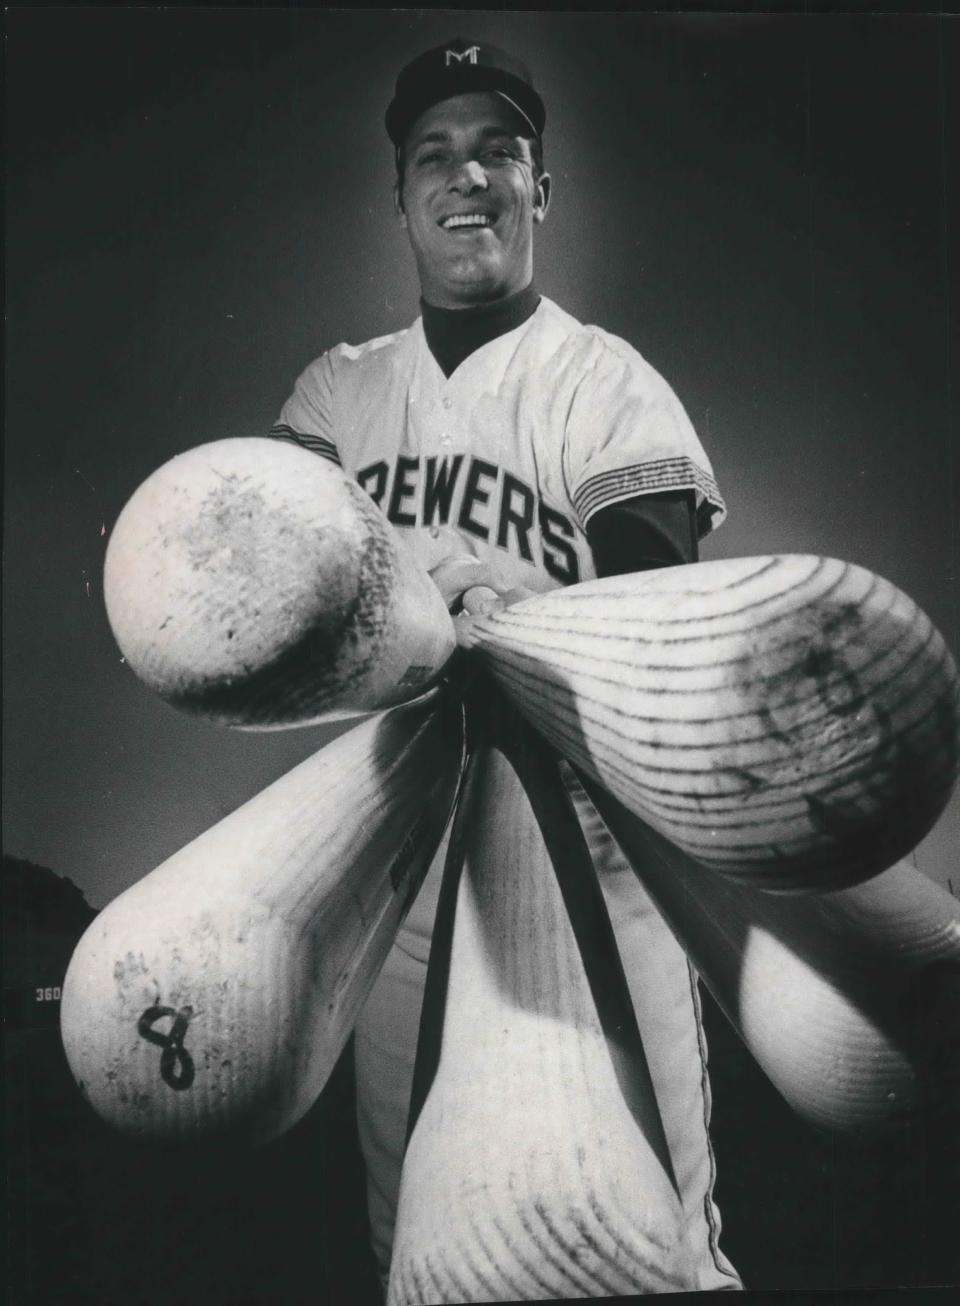 First baseman Mike Hegan was the first in Milwaukee Brewers franchise history to hit for the cycle.